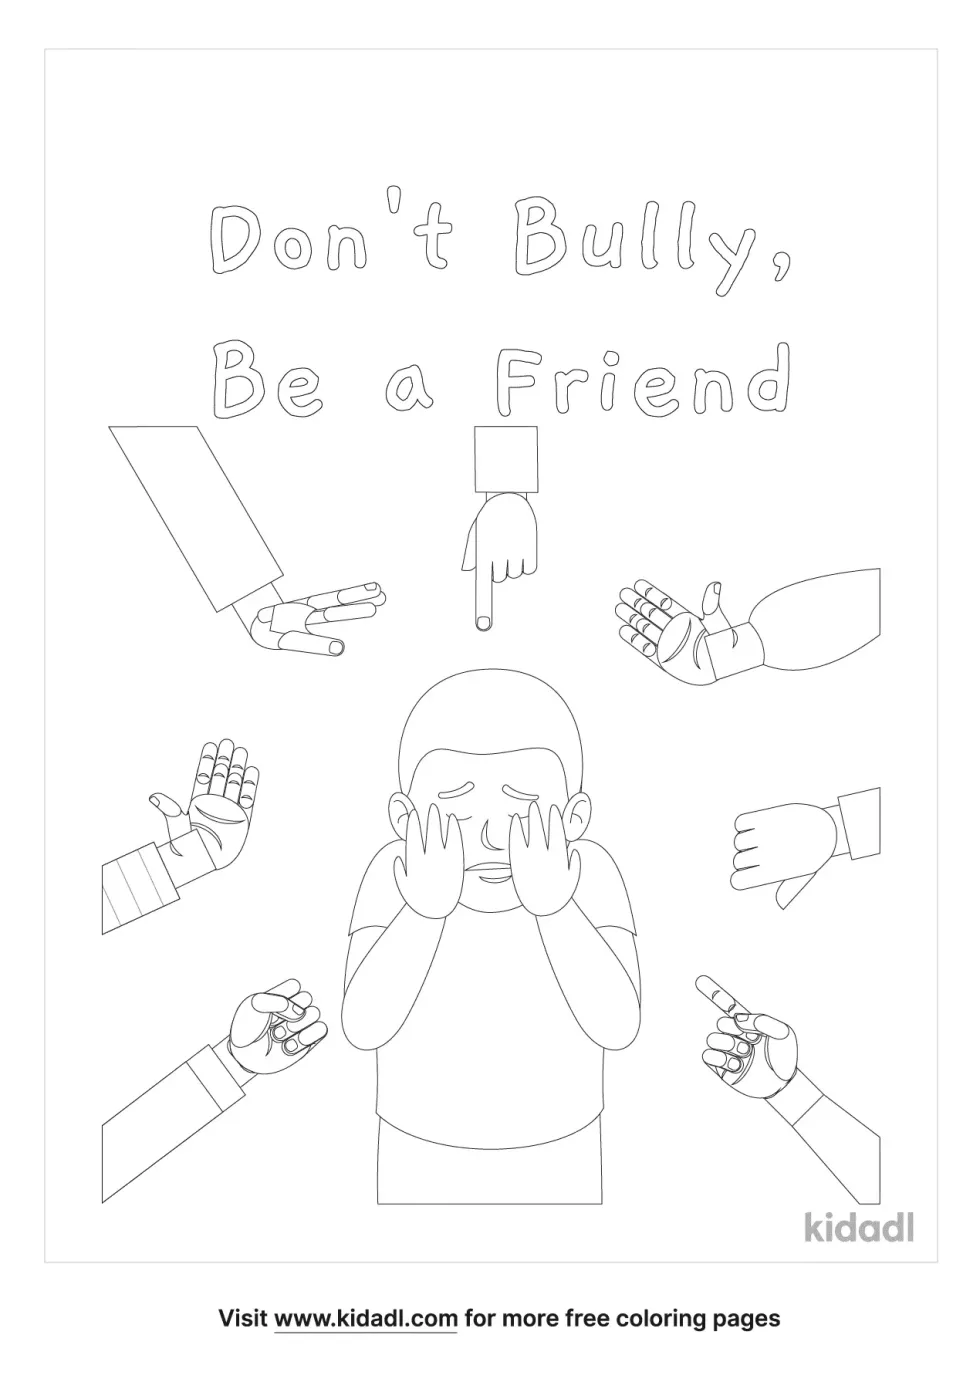 Don't Bully, Be A Friend